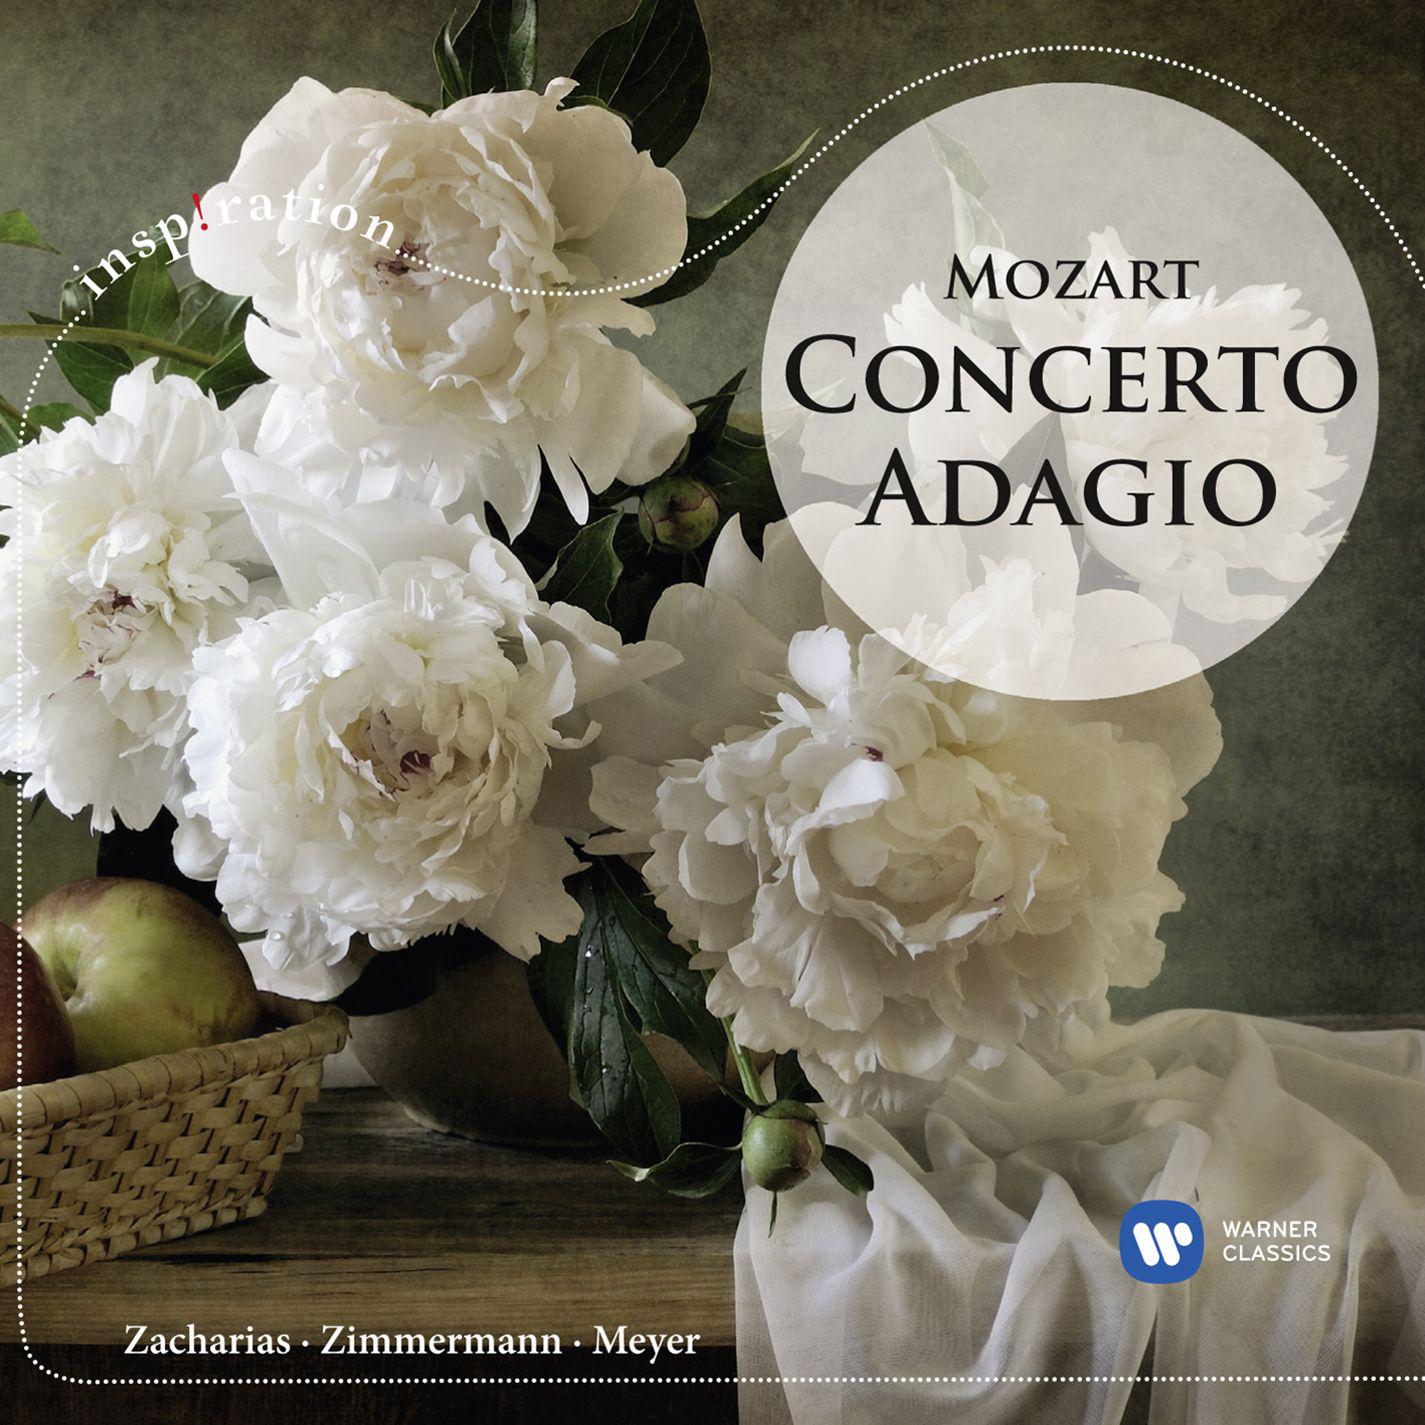 Sinfonia concertante for Violin and Viola in E-Flat Major, K. 364:II. Andante